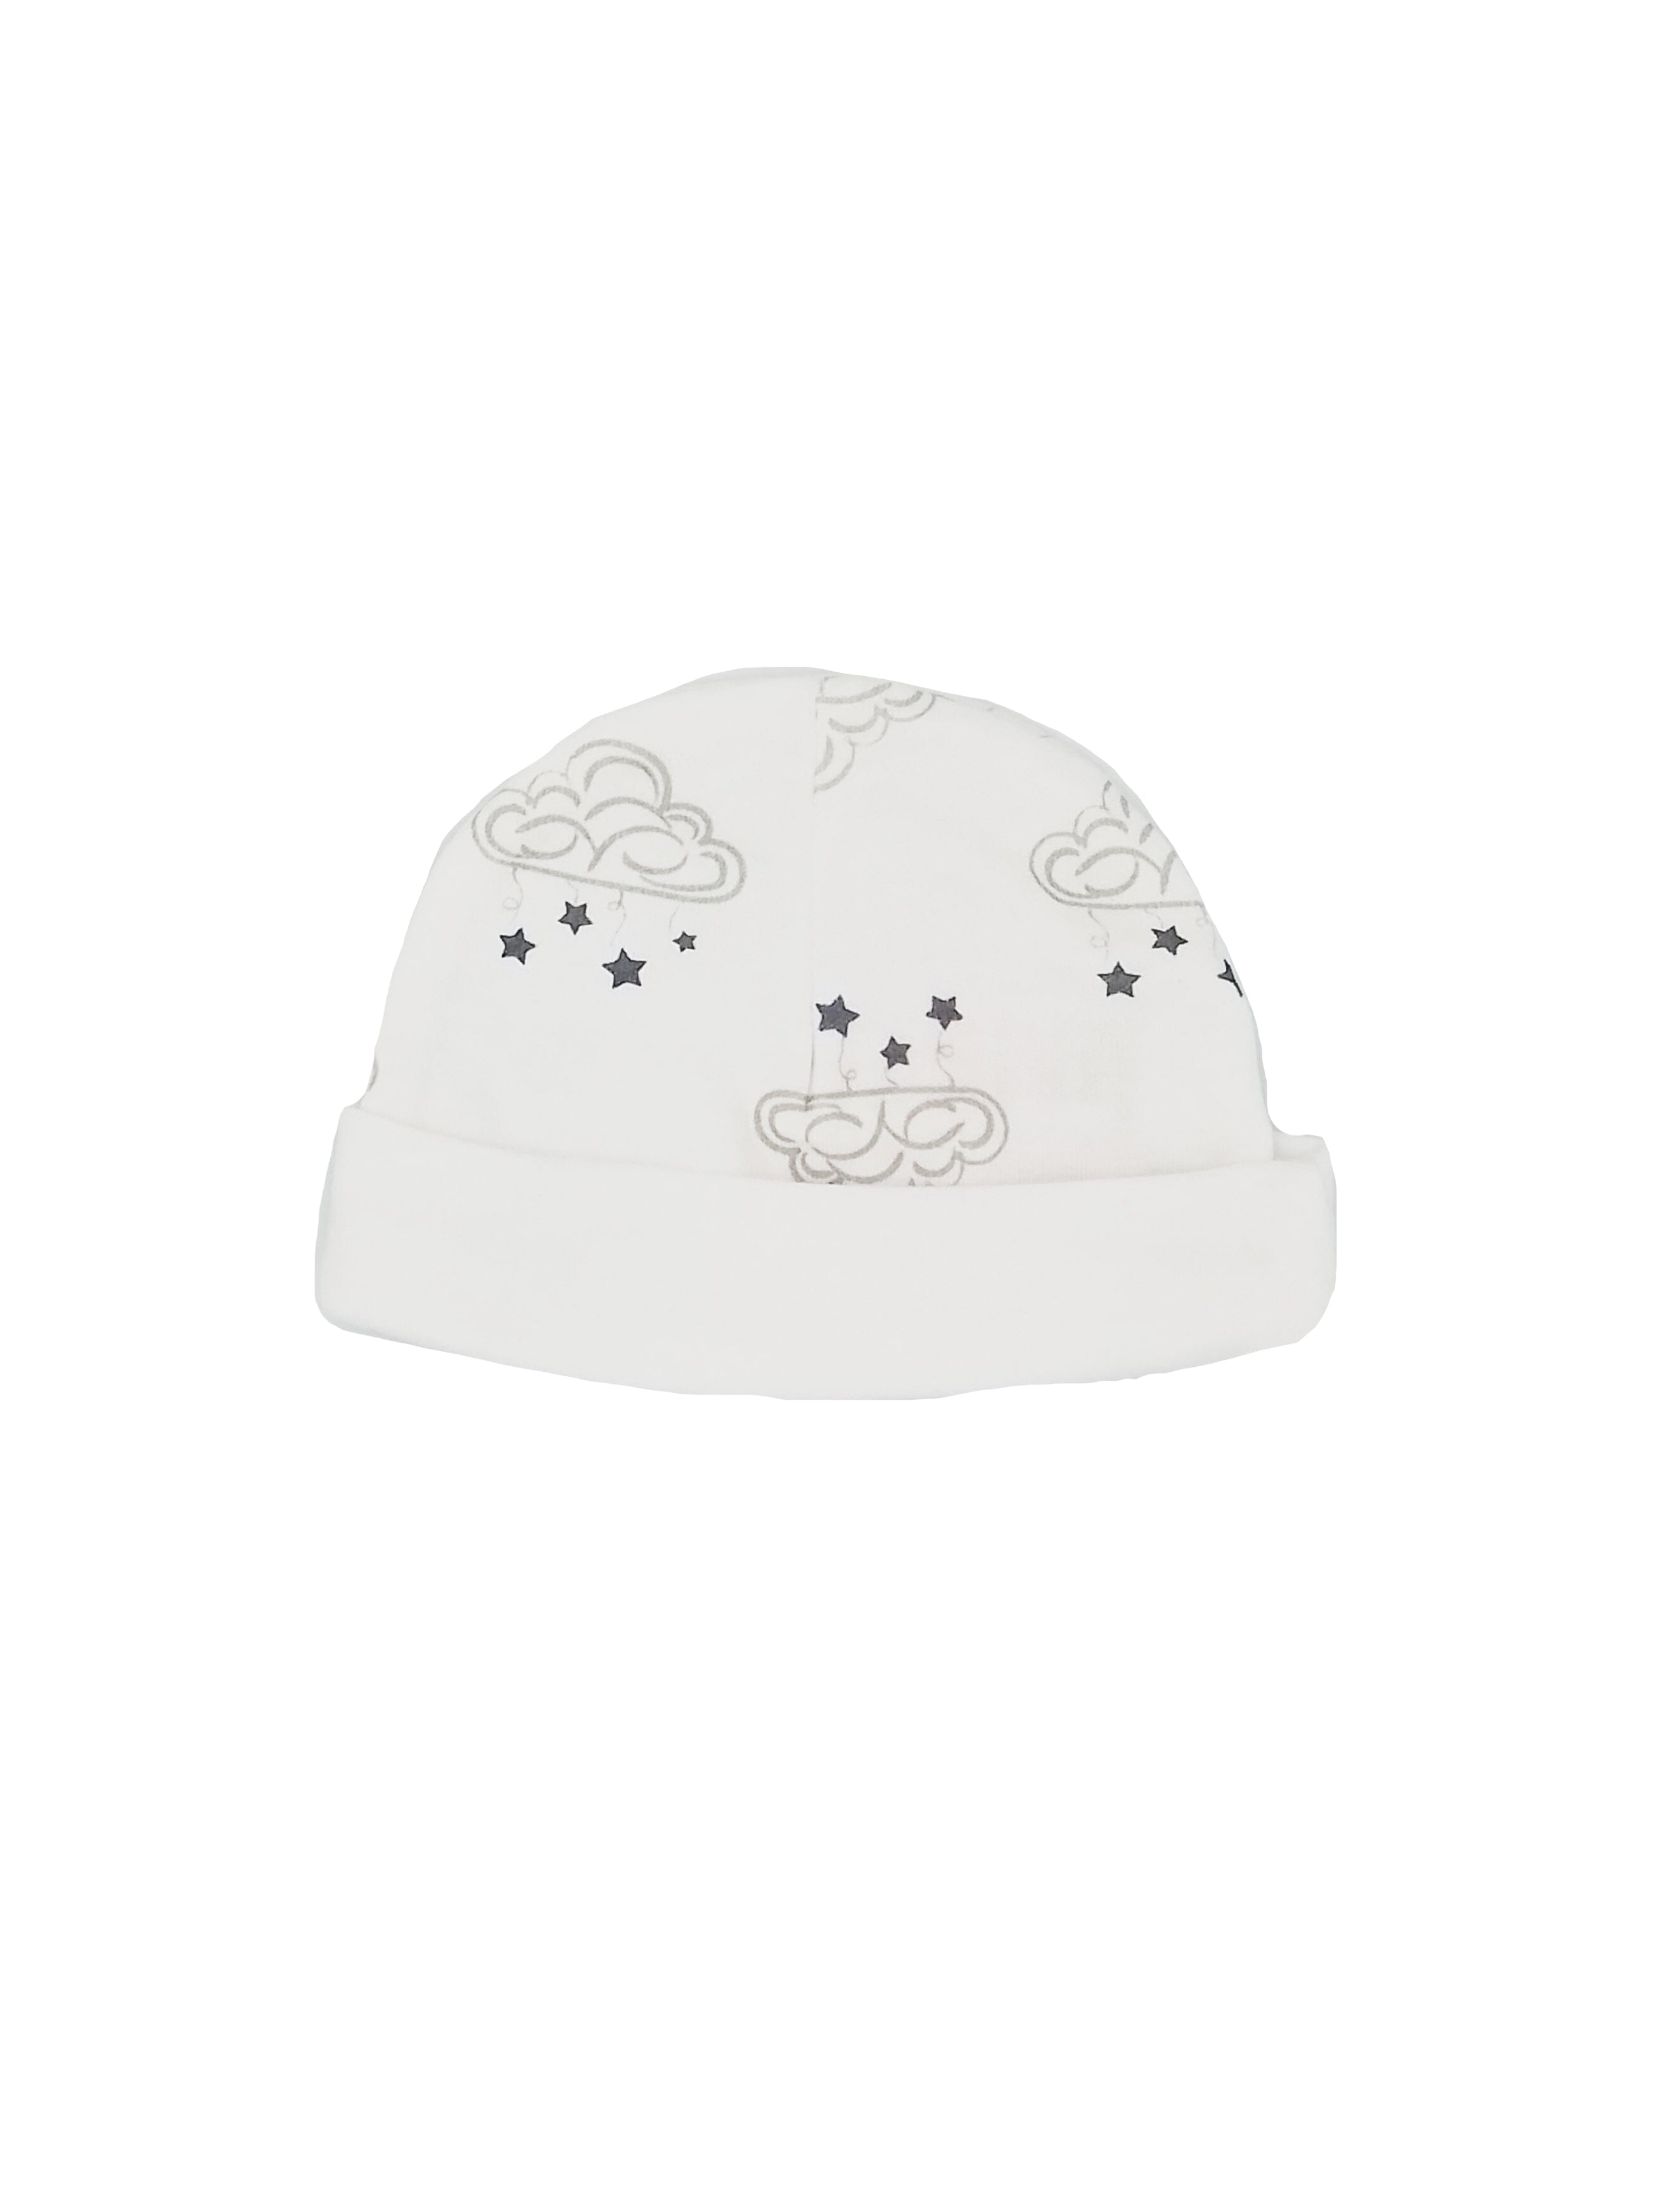 100% Cotton Cloud & Stars Design Hat - baby and toddler hat - Soft Touch